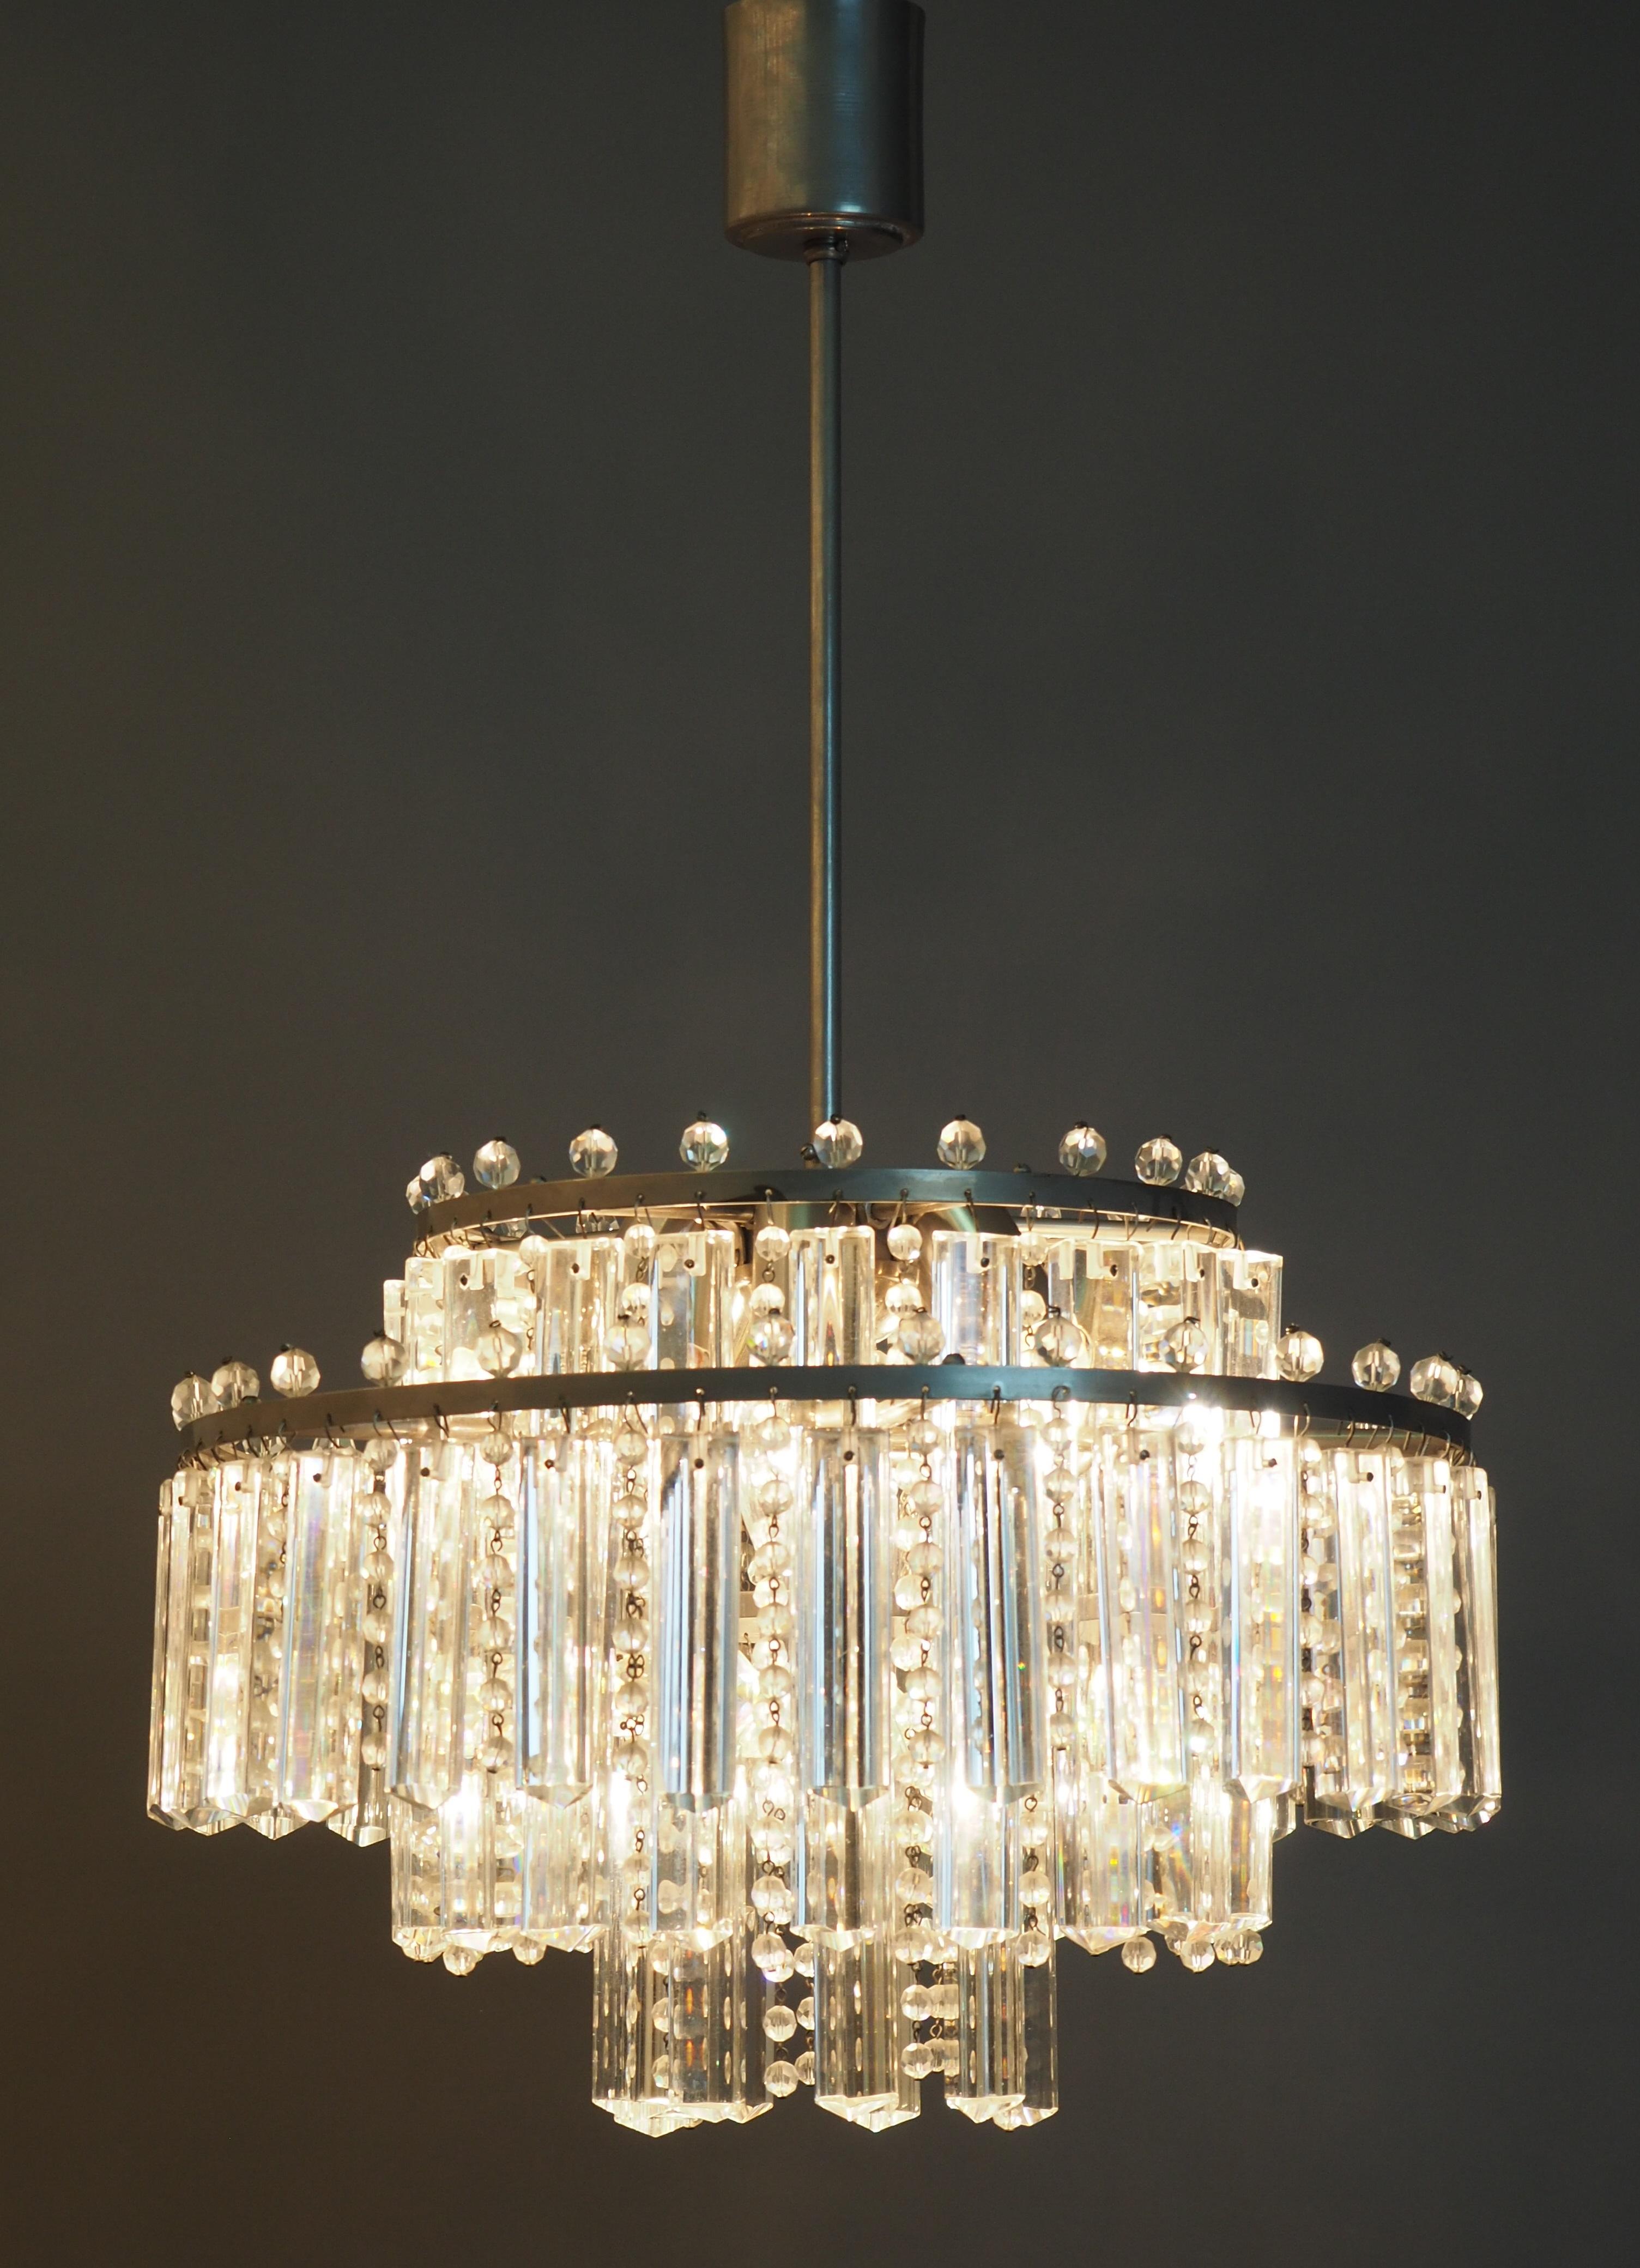 Stunning Set of Haevy Cut Glass and Nickel Chandeliers by Palwa, circa 1960s For Sale 8